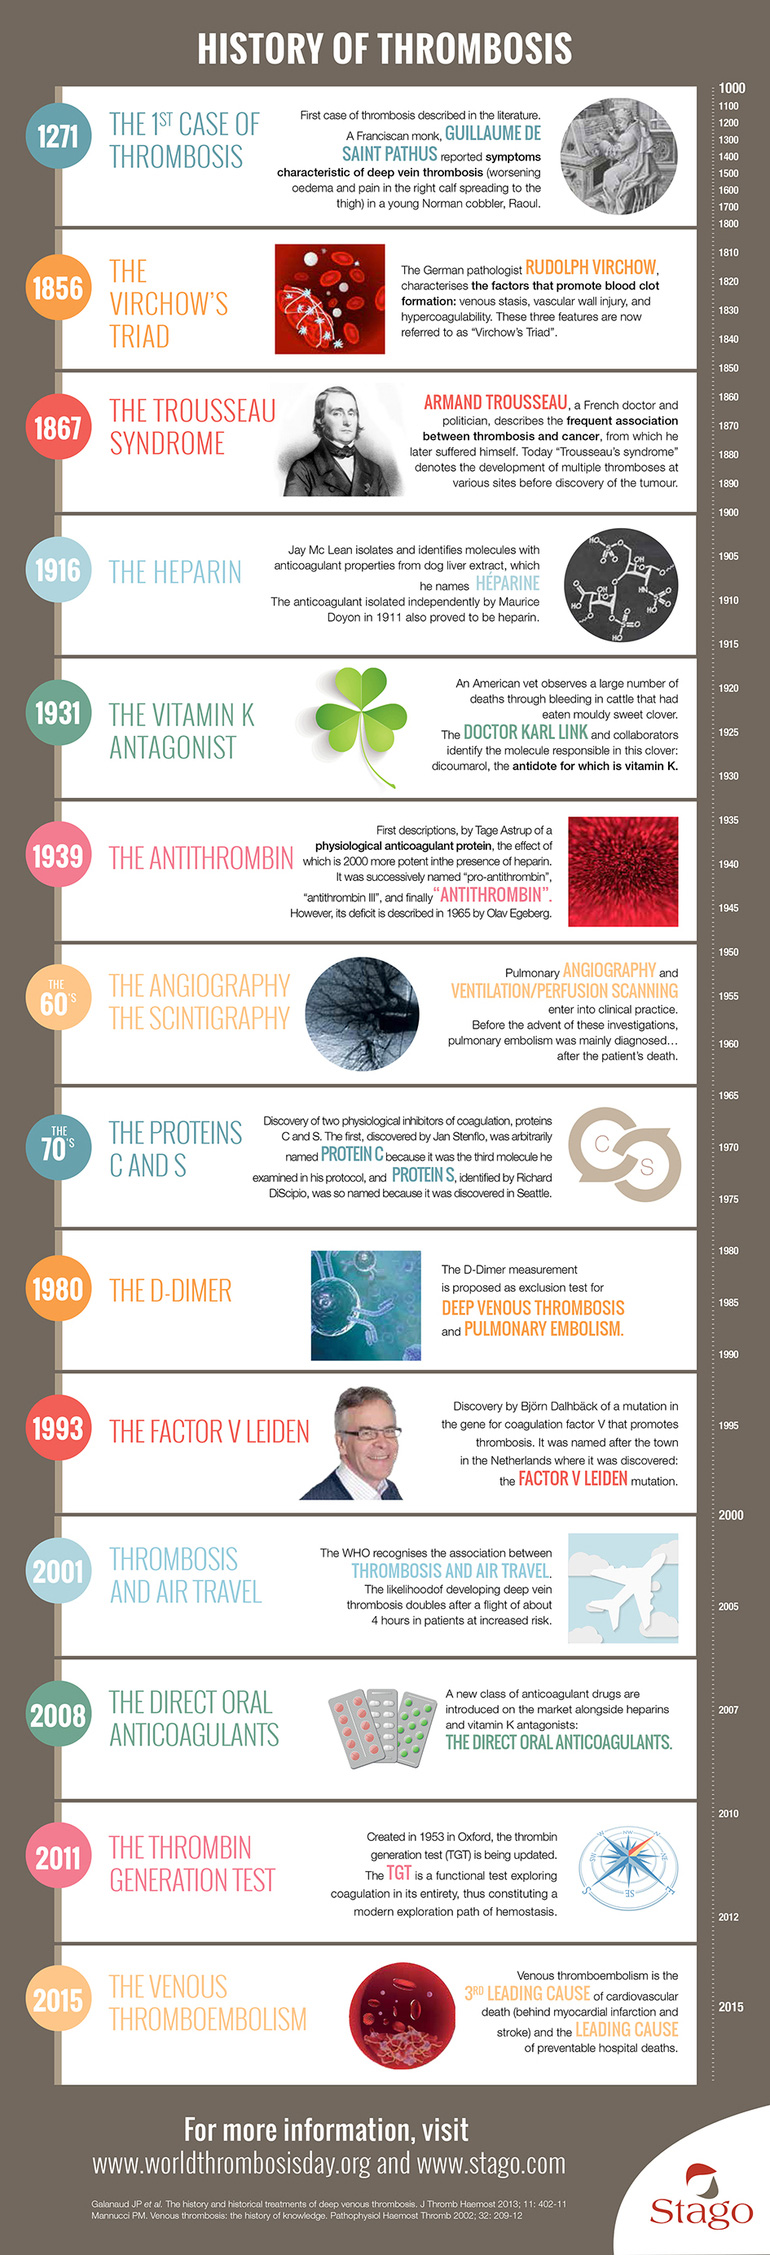 History of Thrombosis: infographic from the first case to the present day 